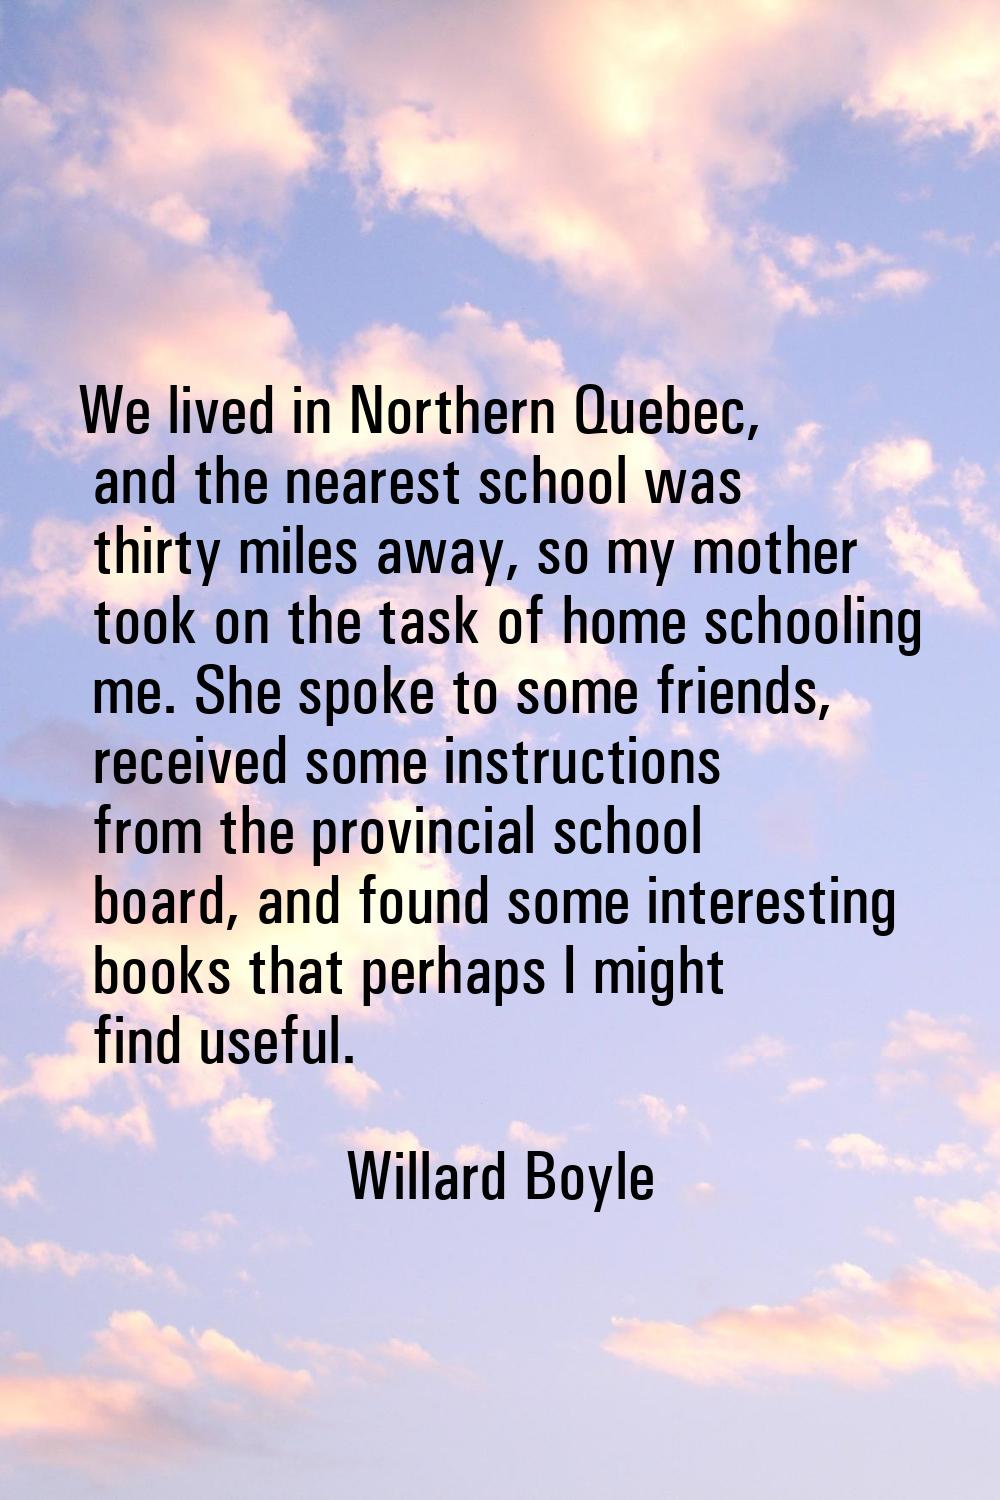 We lived in Northern Quebec, and the nearest school was thirty miles away, so my mother took on the